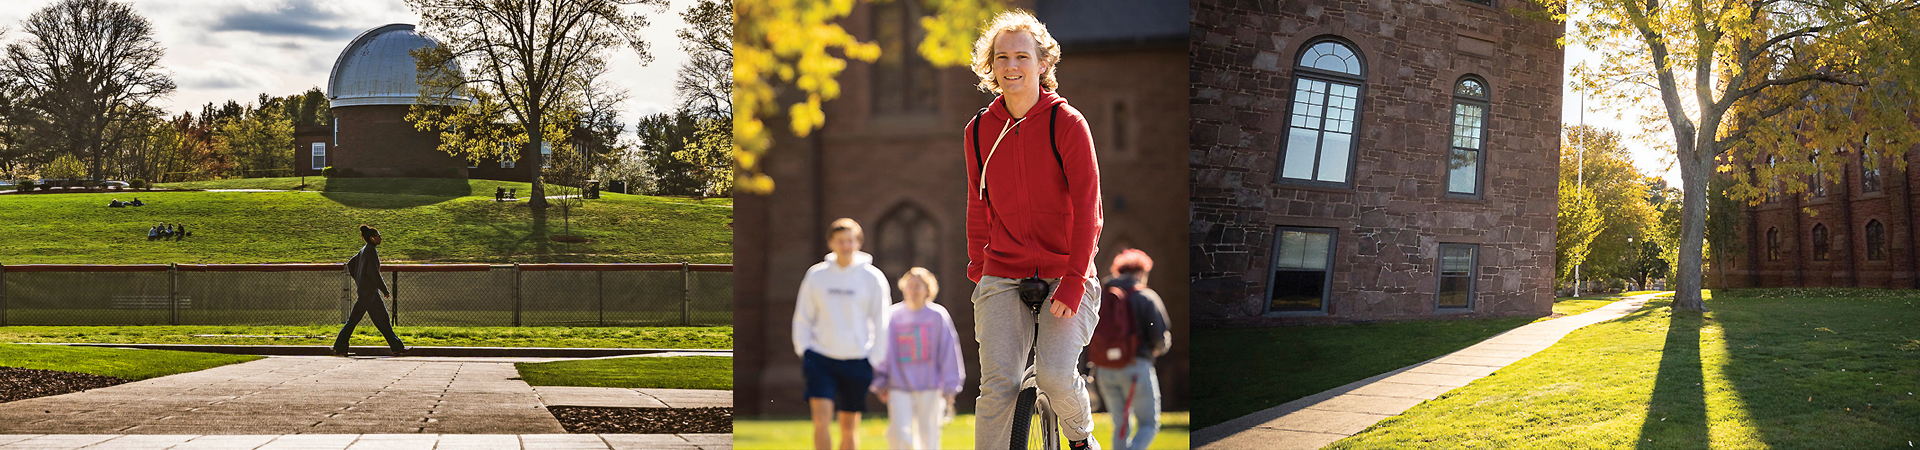 images of students on campus